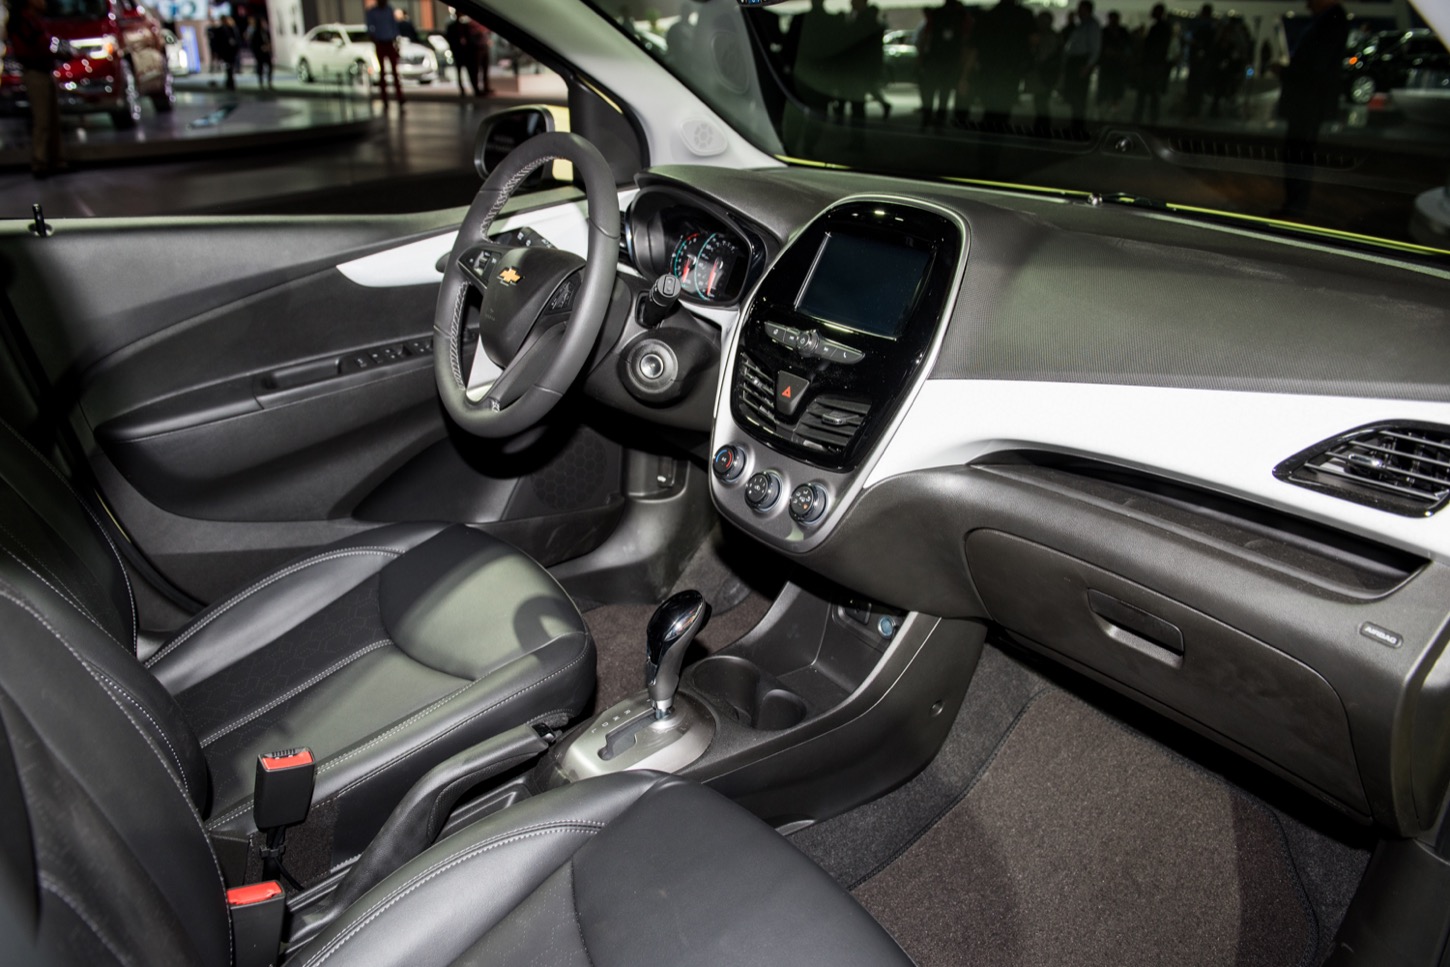 Chevy Spark Interior Hd Wallpapers